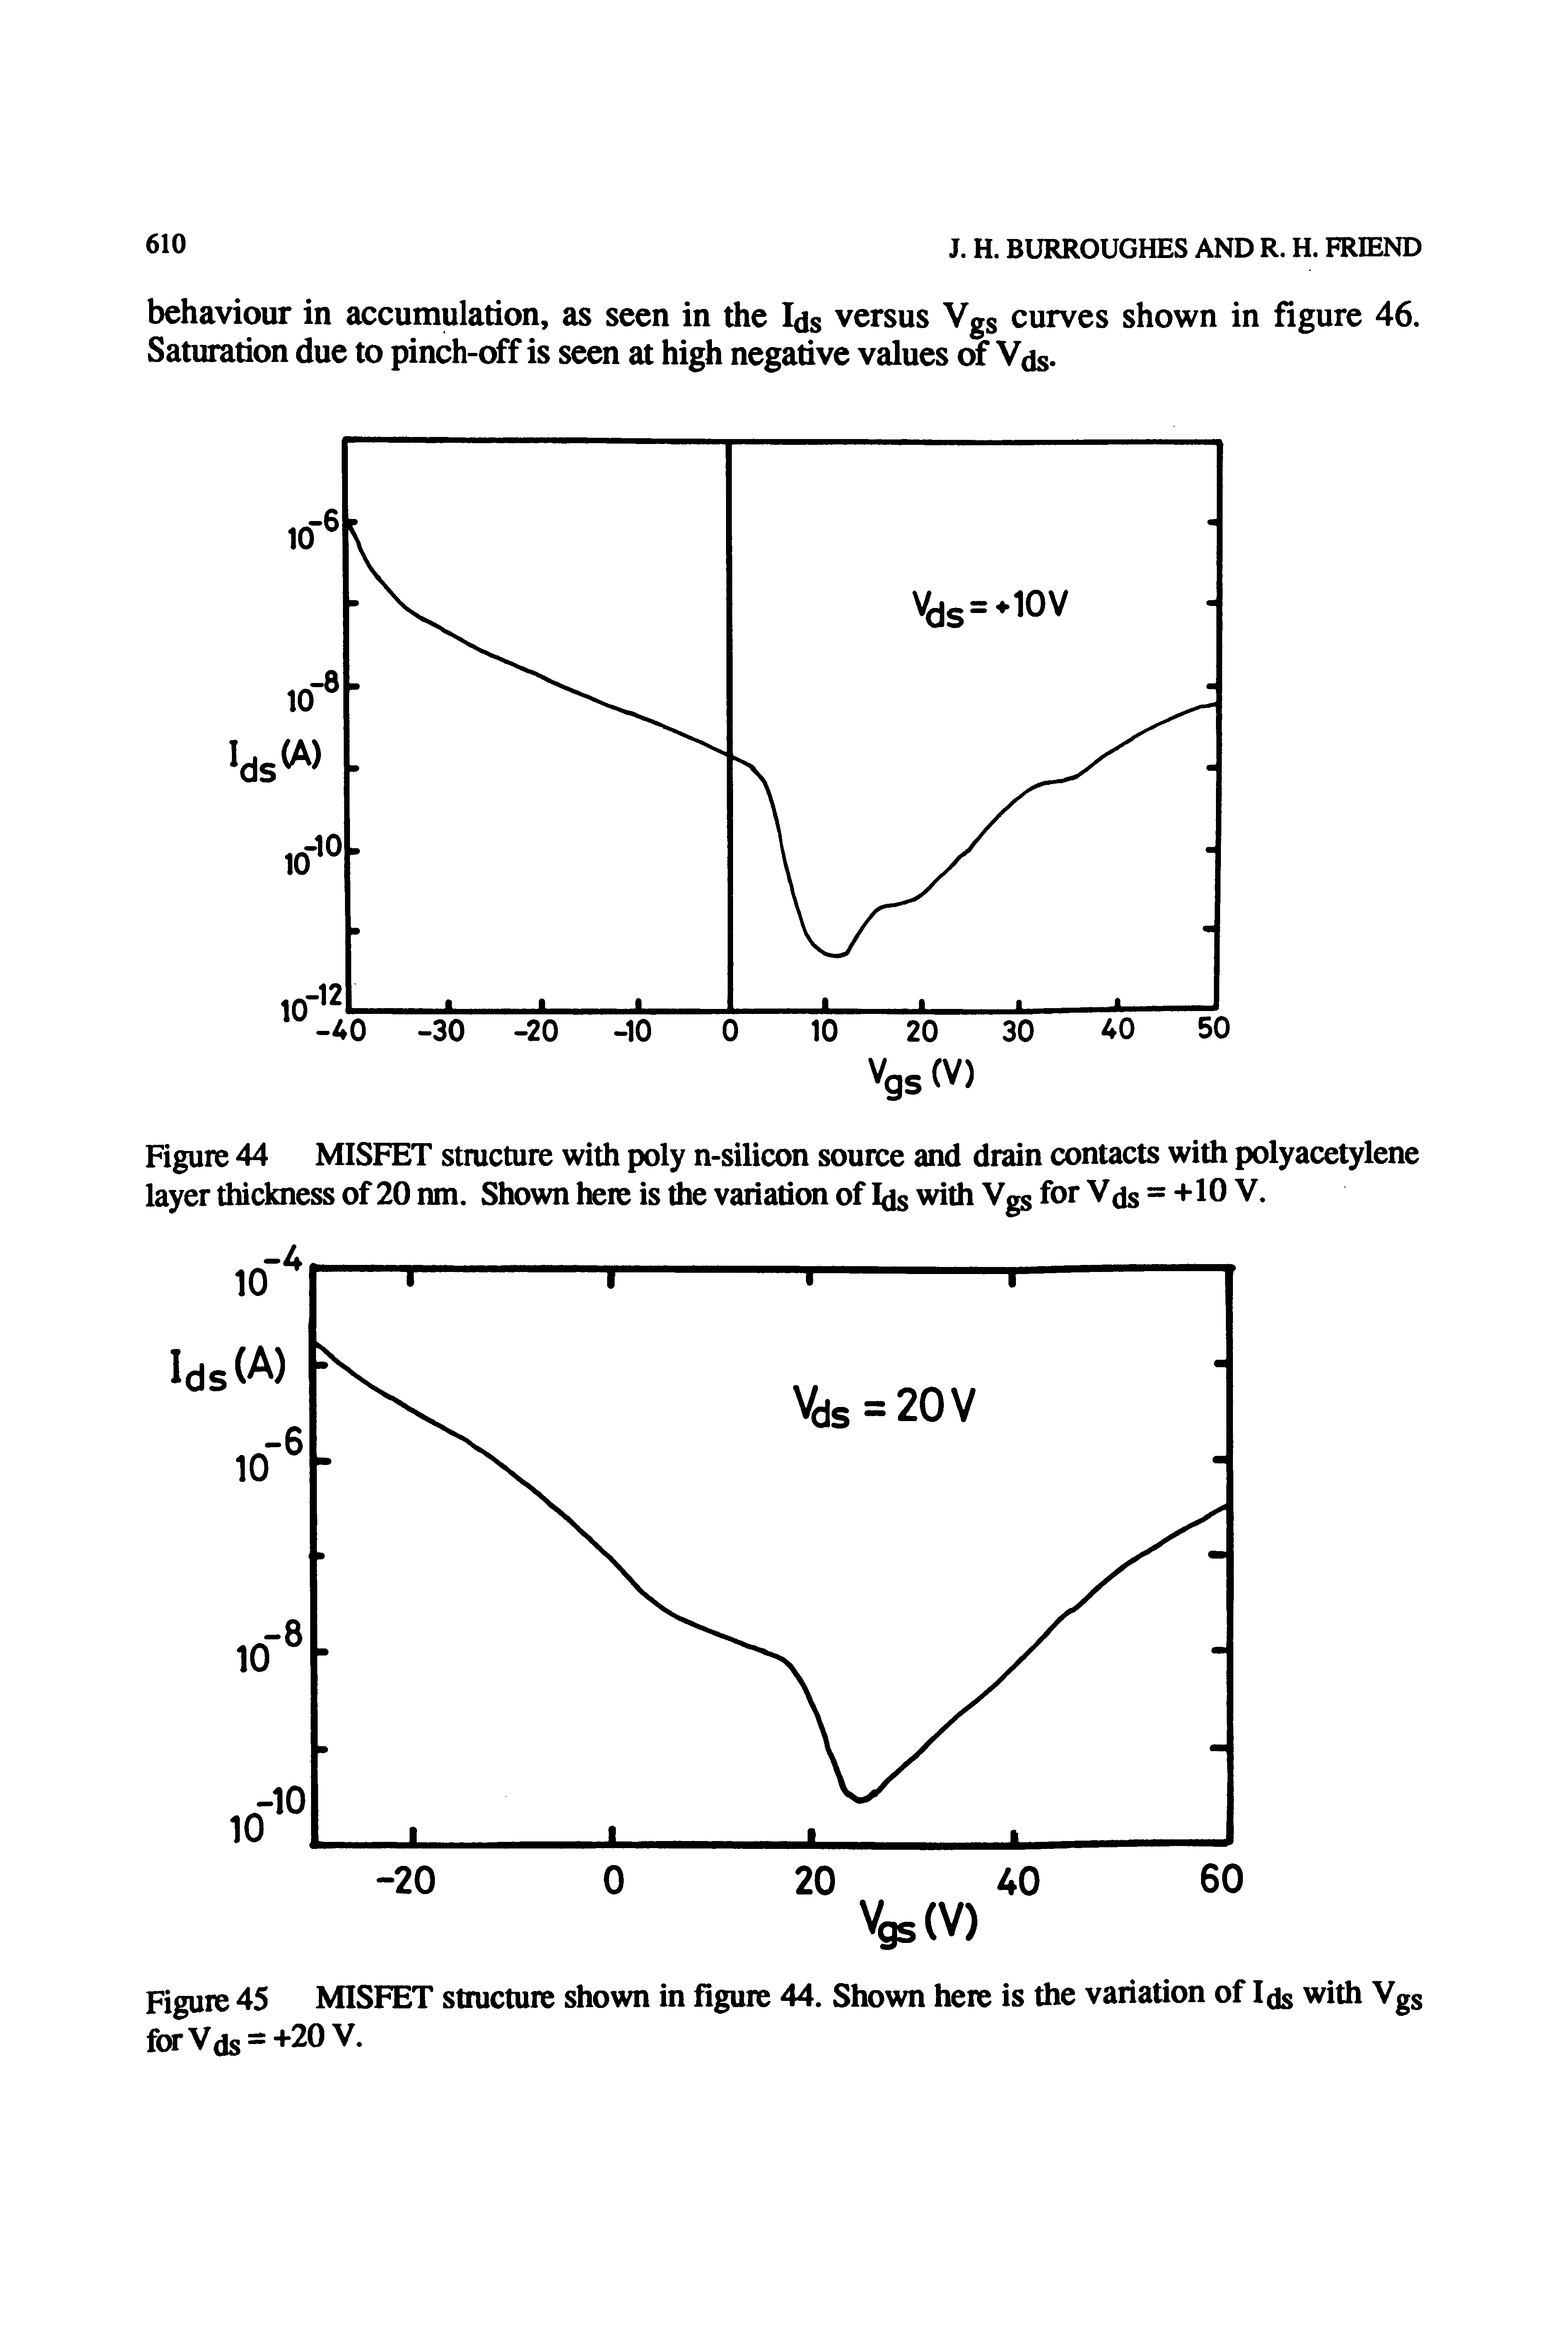 Figure 44 MISFET structure with poly n-silicon source and drain contacts with polyacetylene layer thickness of 20 nm. Shown here is the variation of Ids with Vgs for Vds =+10 V.